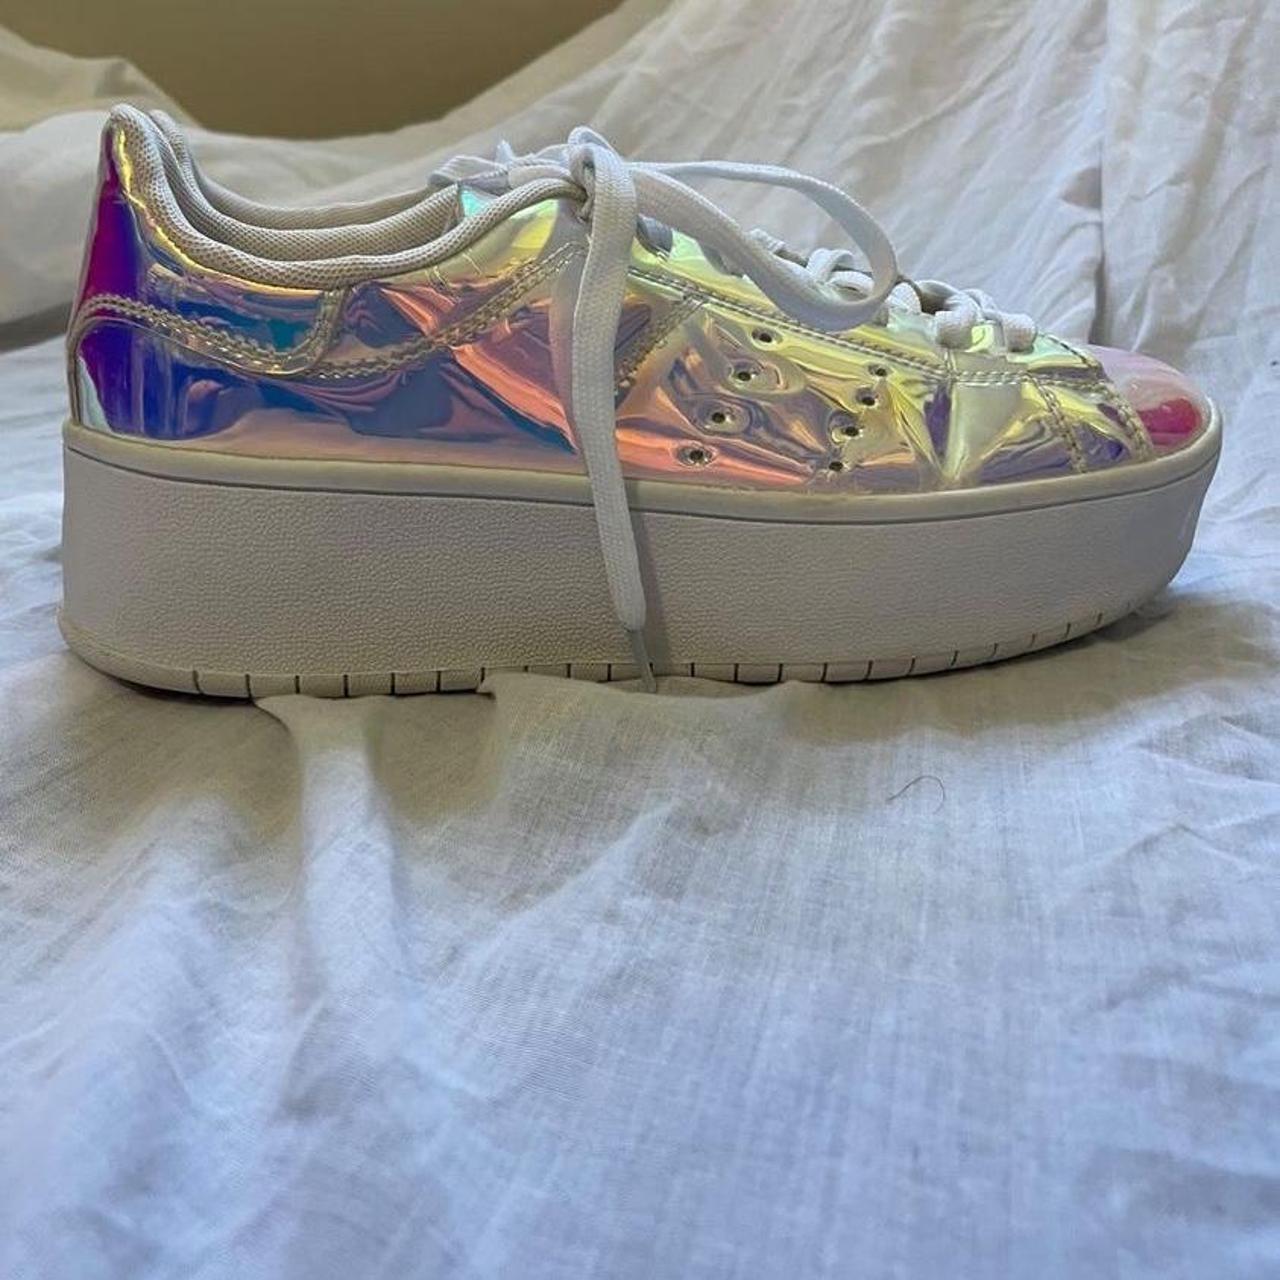 Product Image 3 - 2 INCH Holographic Platforms 

PLEASE